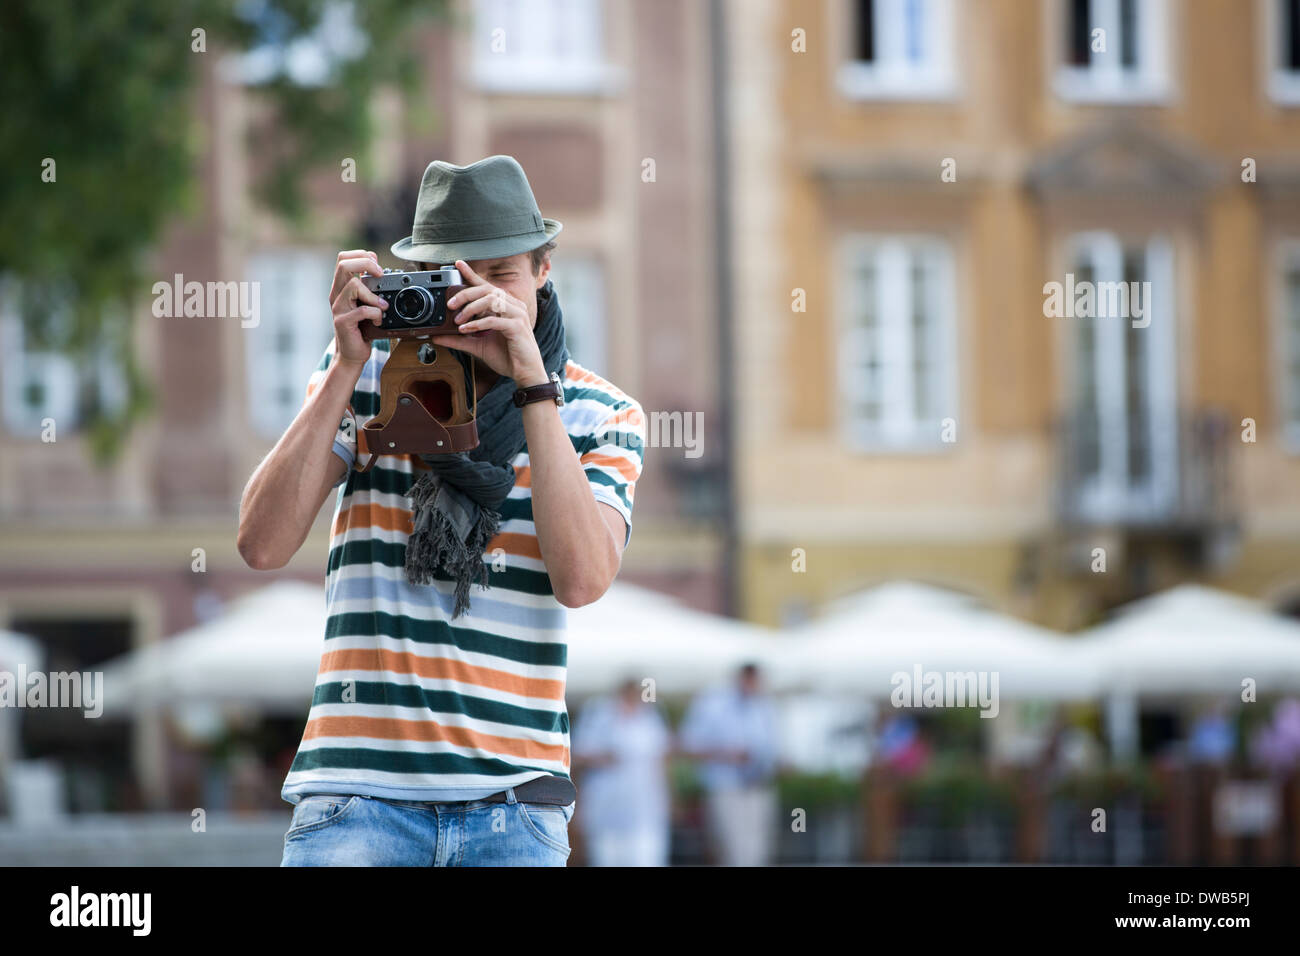 Young man photographing through vintage camera outdoors Stock Photo